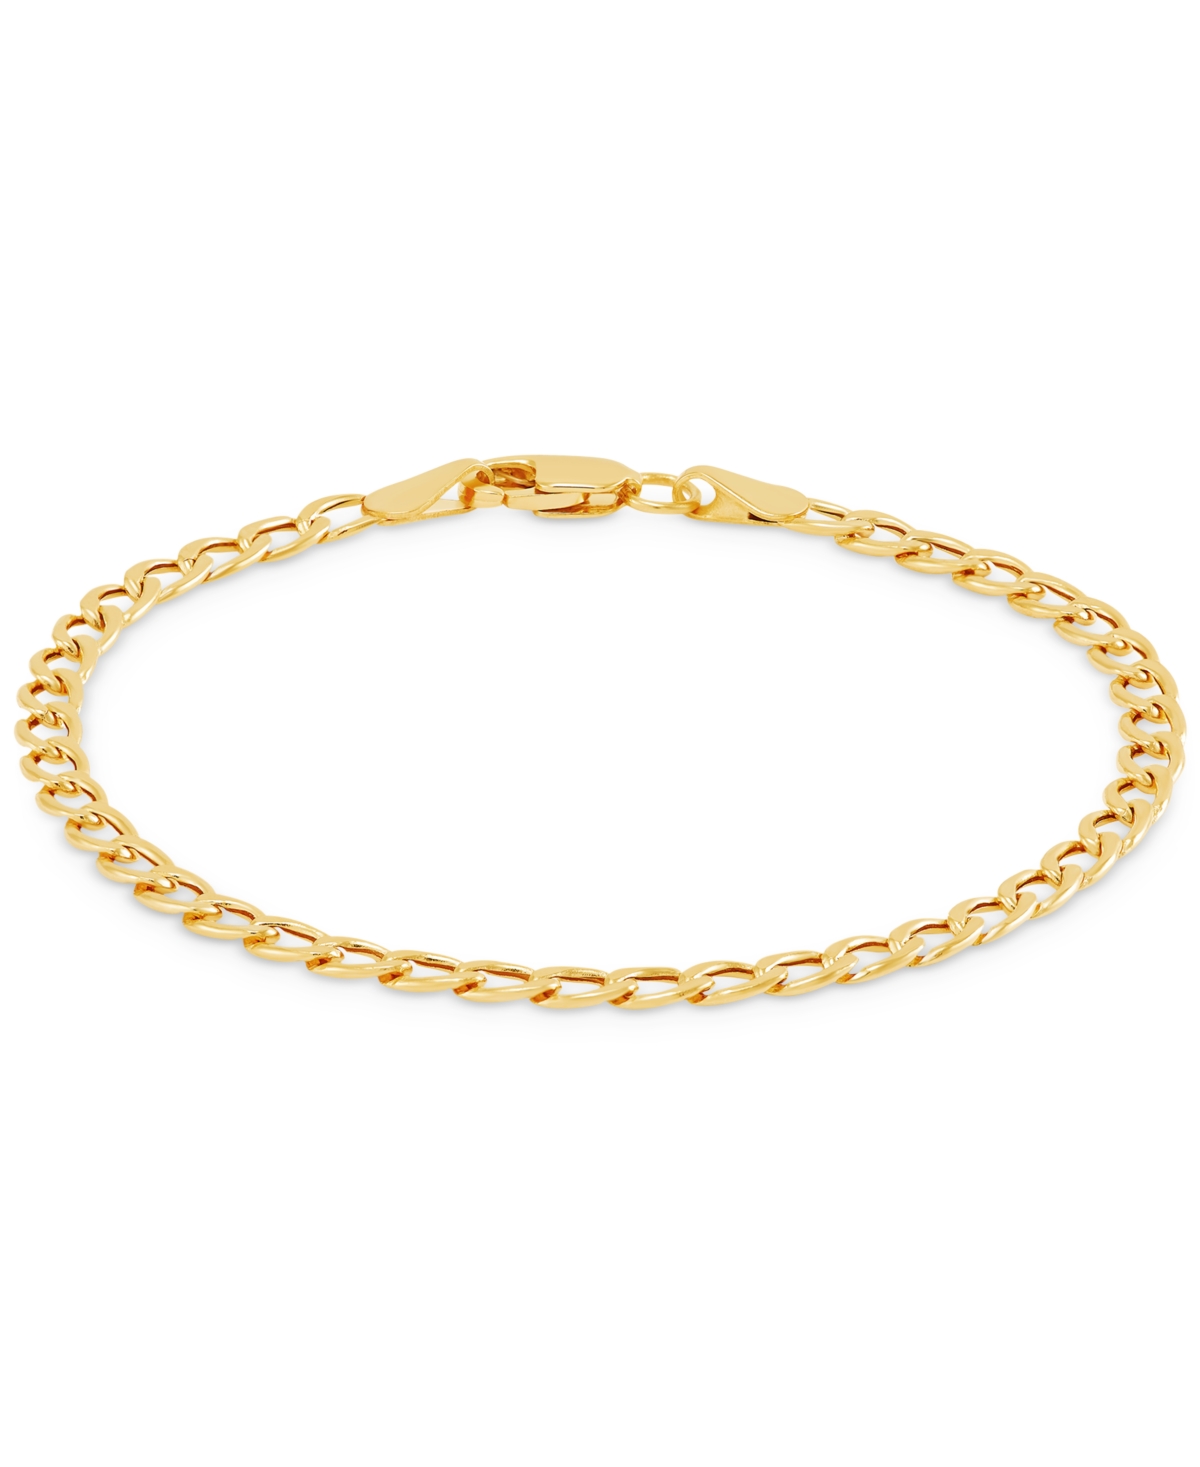 Macy's Children's Polished Hollow Curb Chain Bracelet In 14k Yellow Gold